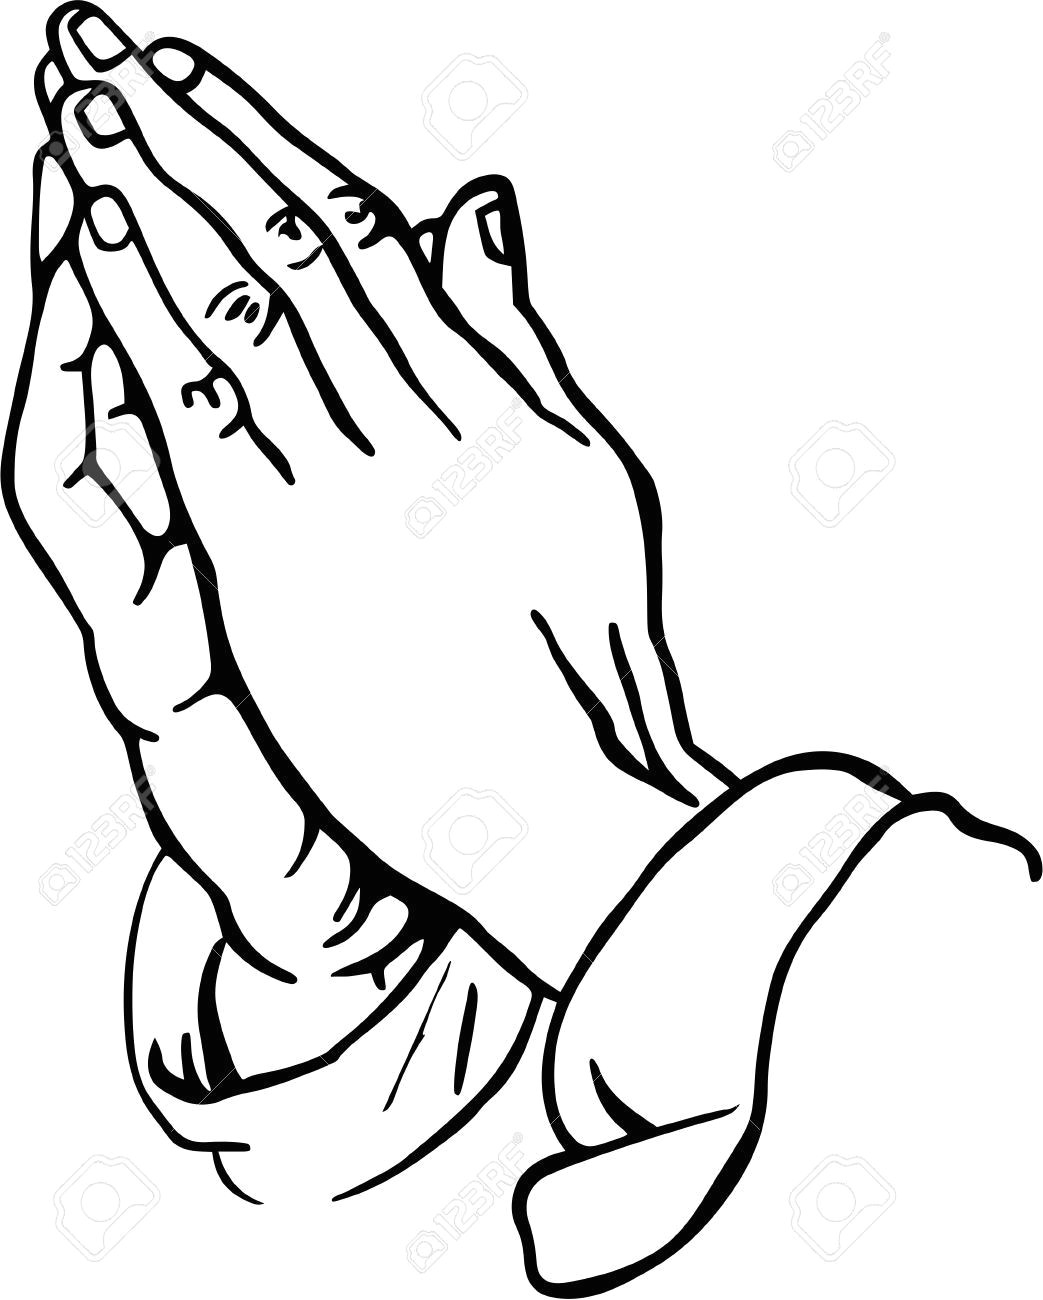 easy rider line drawings praying hands clipart stock photo picture and royalty free image more